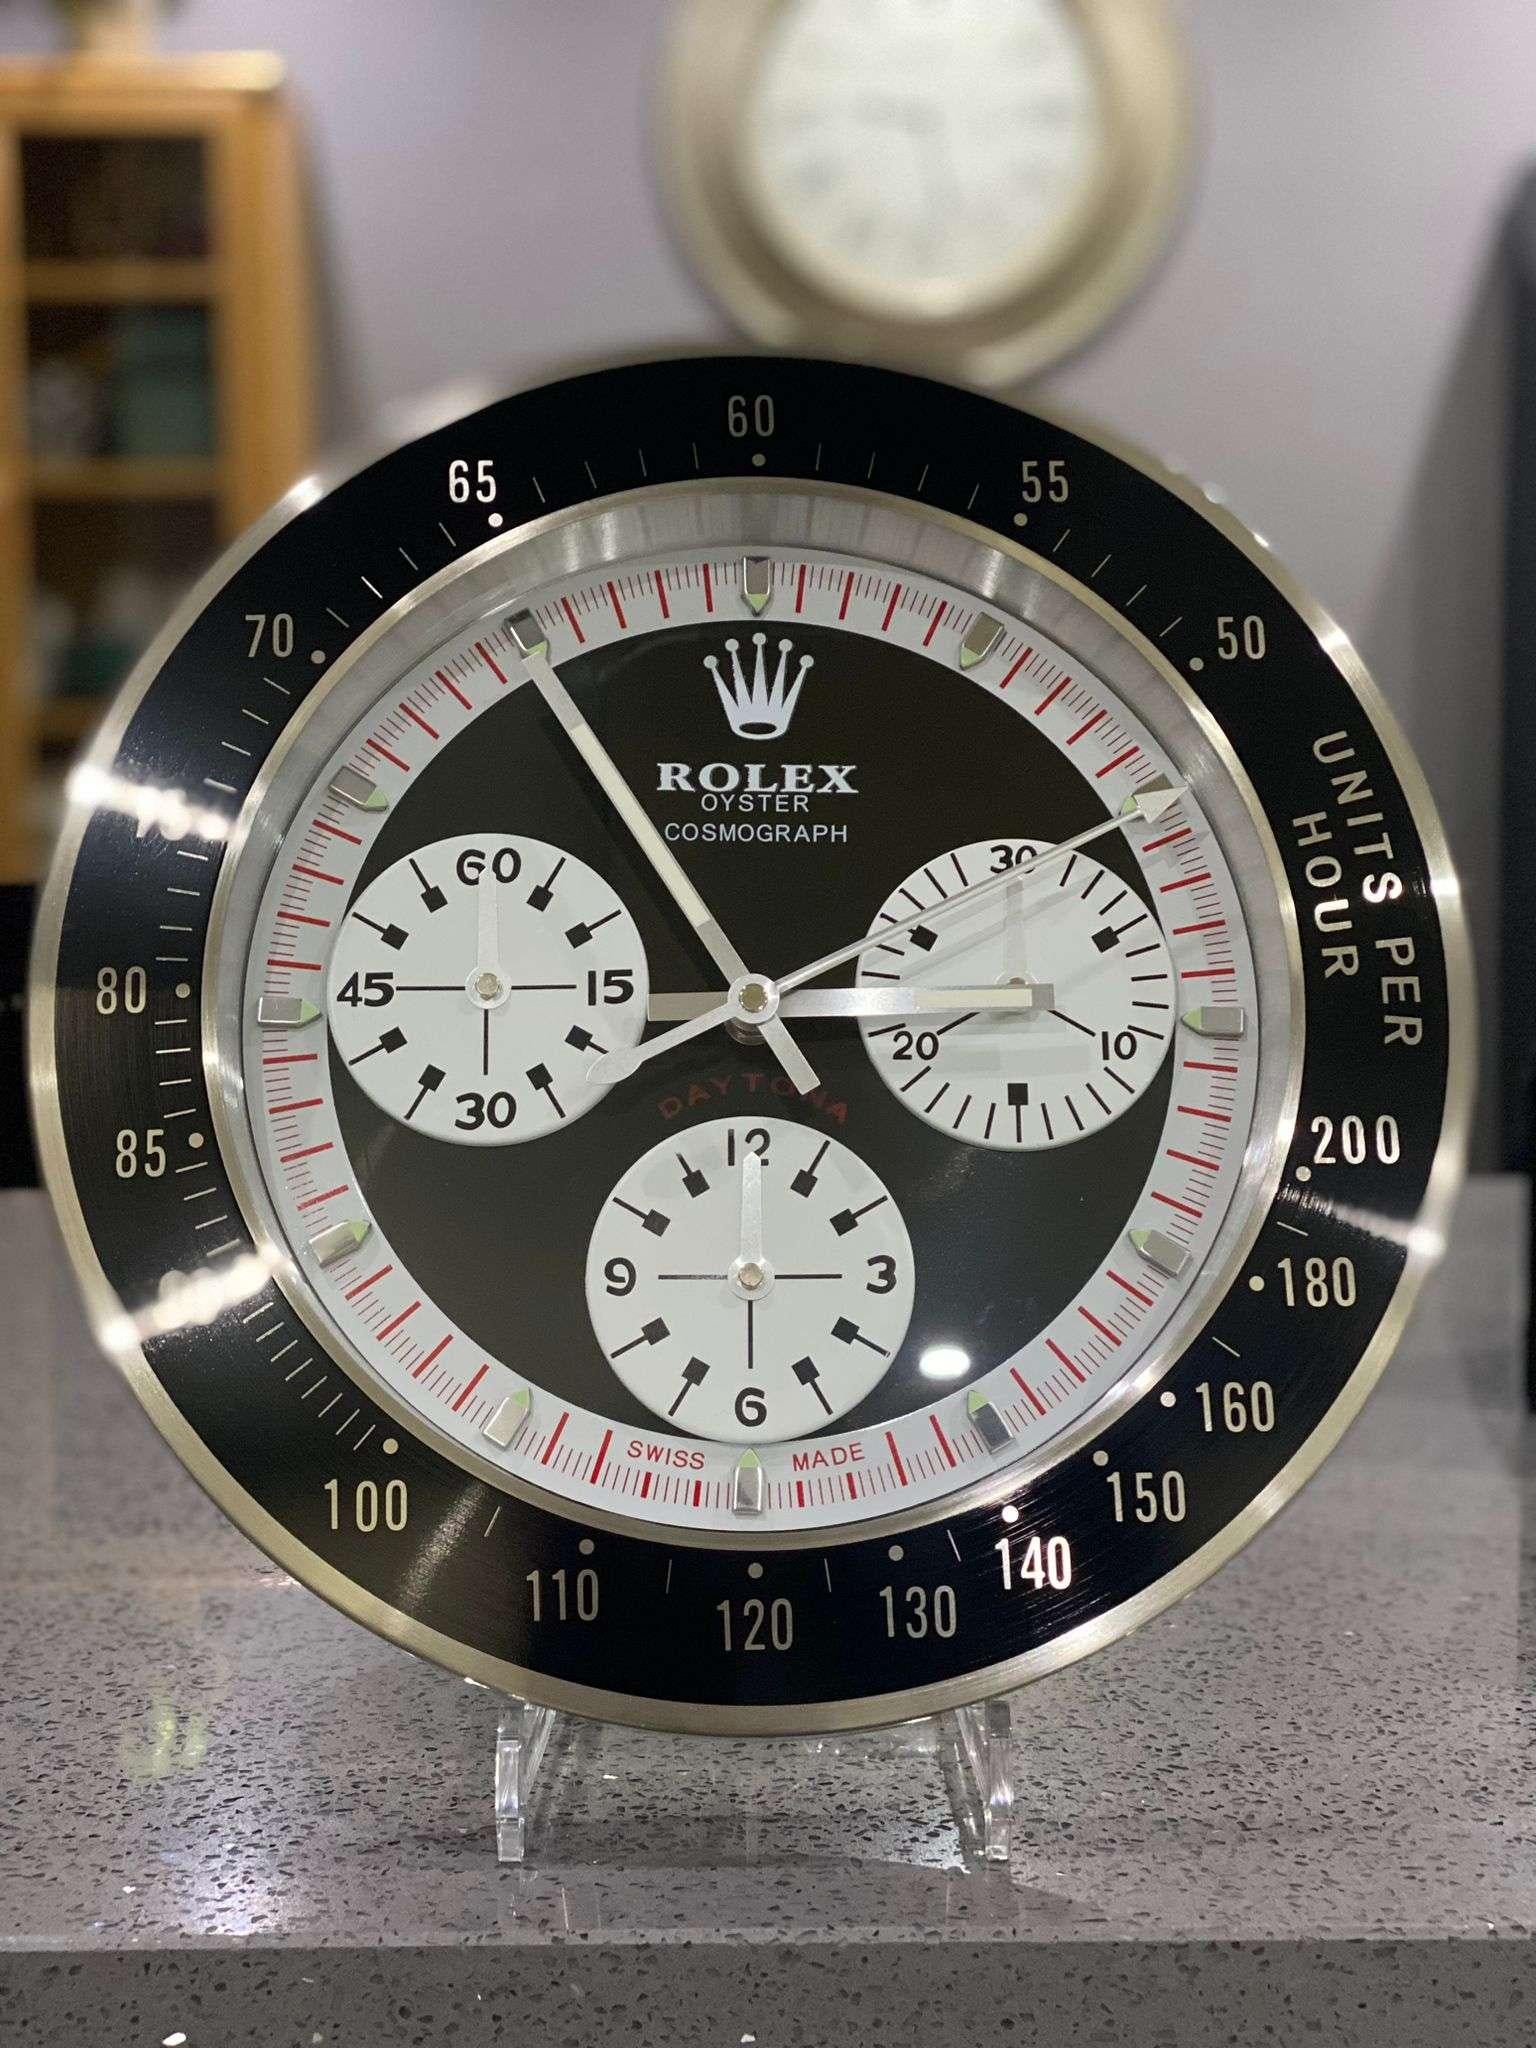 ROLEX Officially Certified Oyster Cosmograph Daytona Wall Clock. With luminous hands, sweeping hands.
Free international shipping.